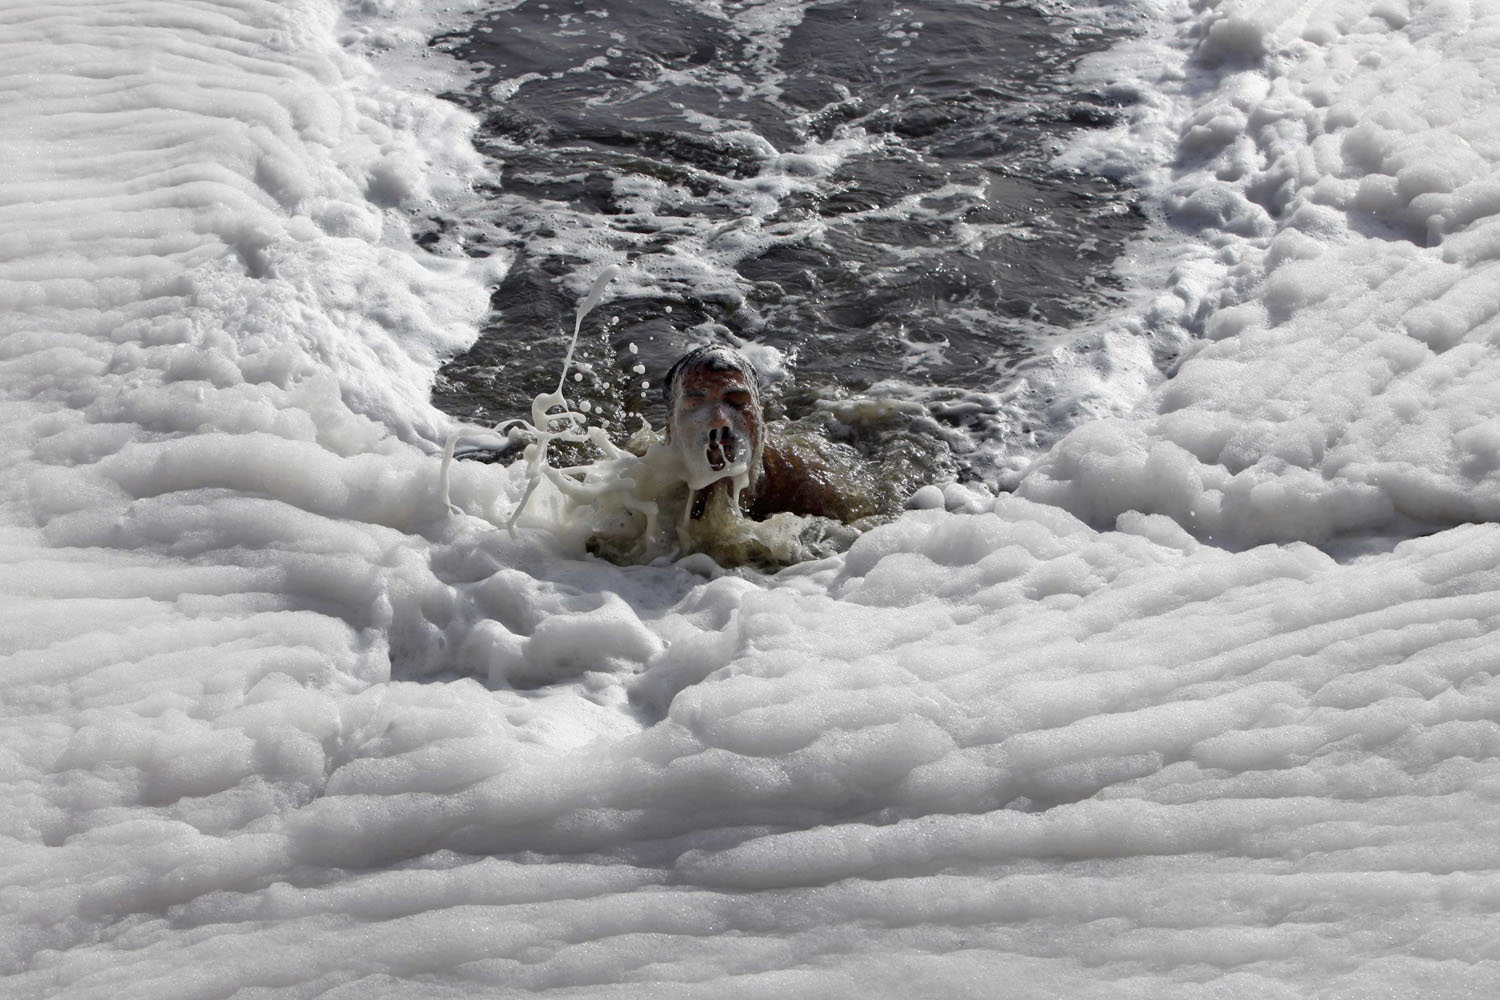 May 29, 2013. A man swims in the polluted waters of river Yamuna on a hot day in New Delhi.